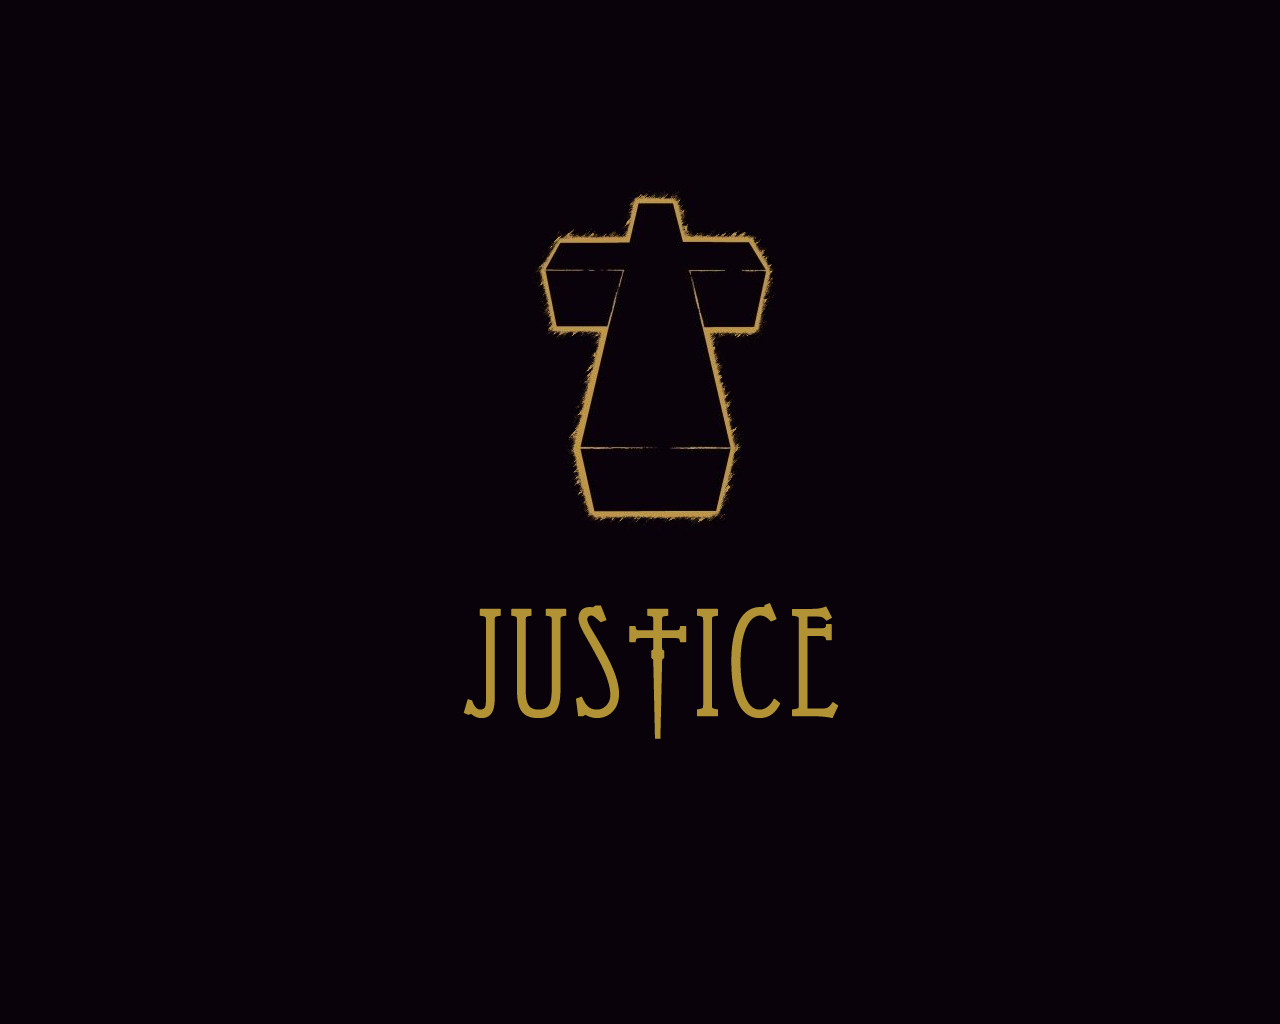 9 Justice HD Wallpapers Backgrounds - Wallpaper Abyss